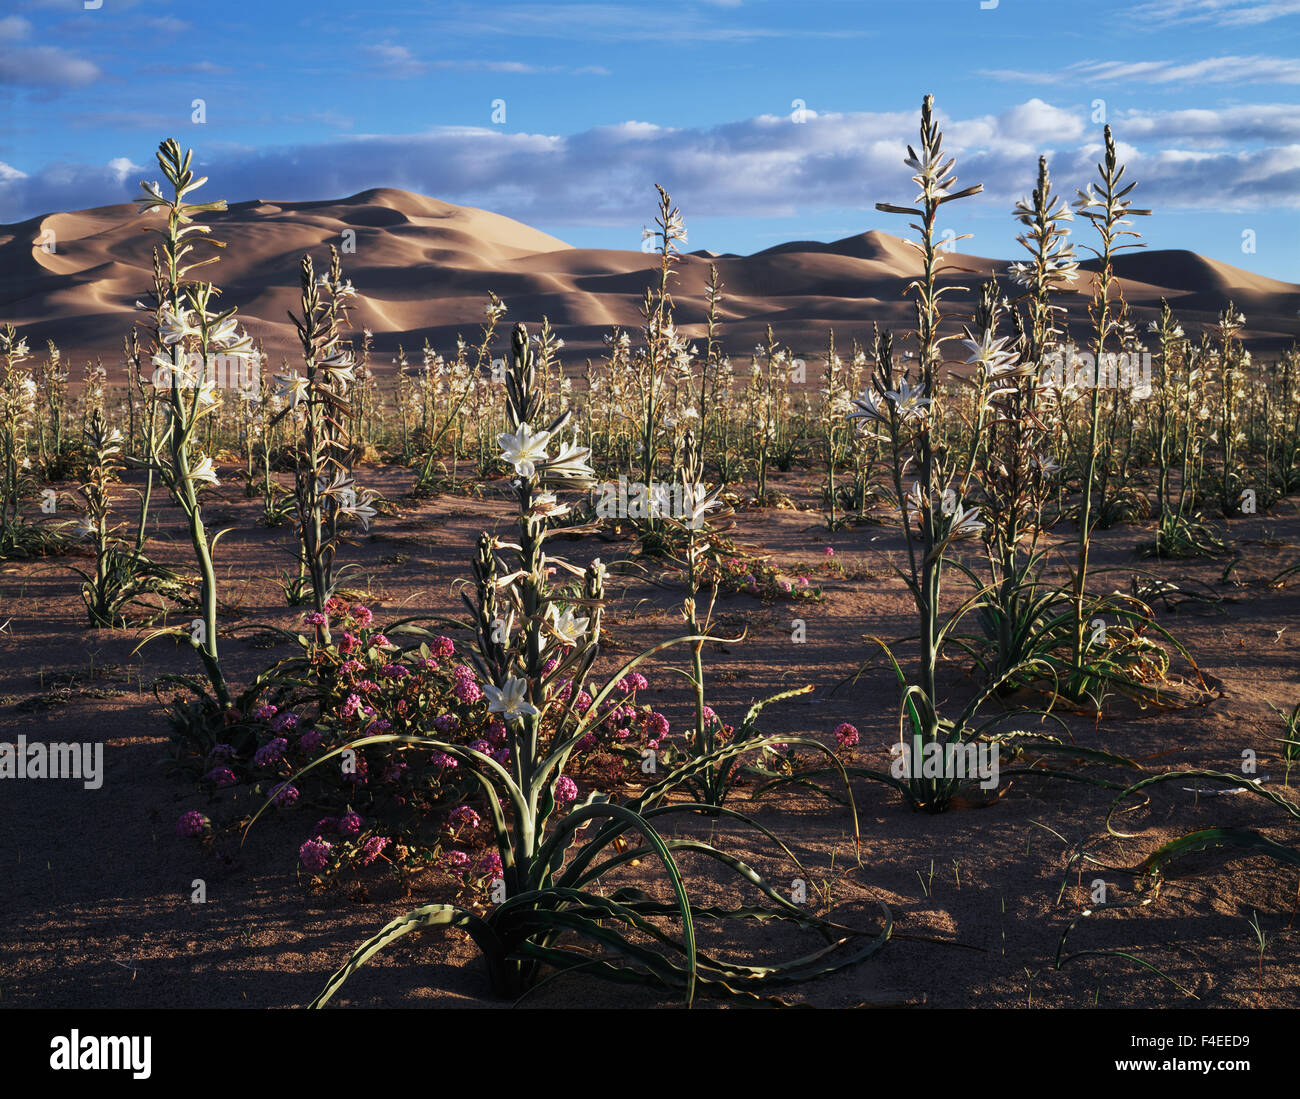 California, Sand Verbena Wildflowers (Abronia villosa) growing at the base of an extremely rare Desert Lily (Hesperocallis) forest on the Dumont Dunes in the Mojave Desert (Large format sizes available) Stock Photo